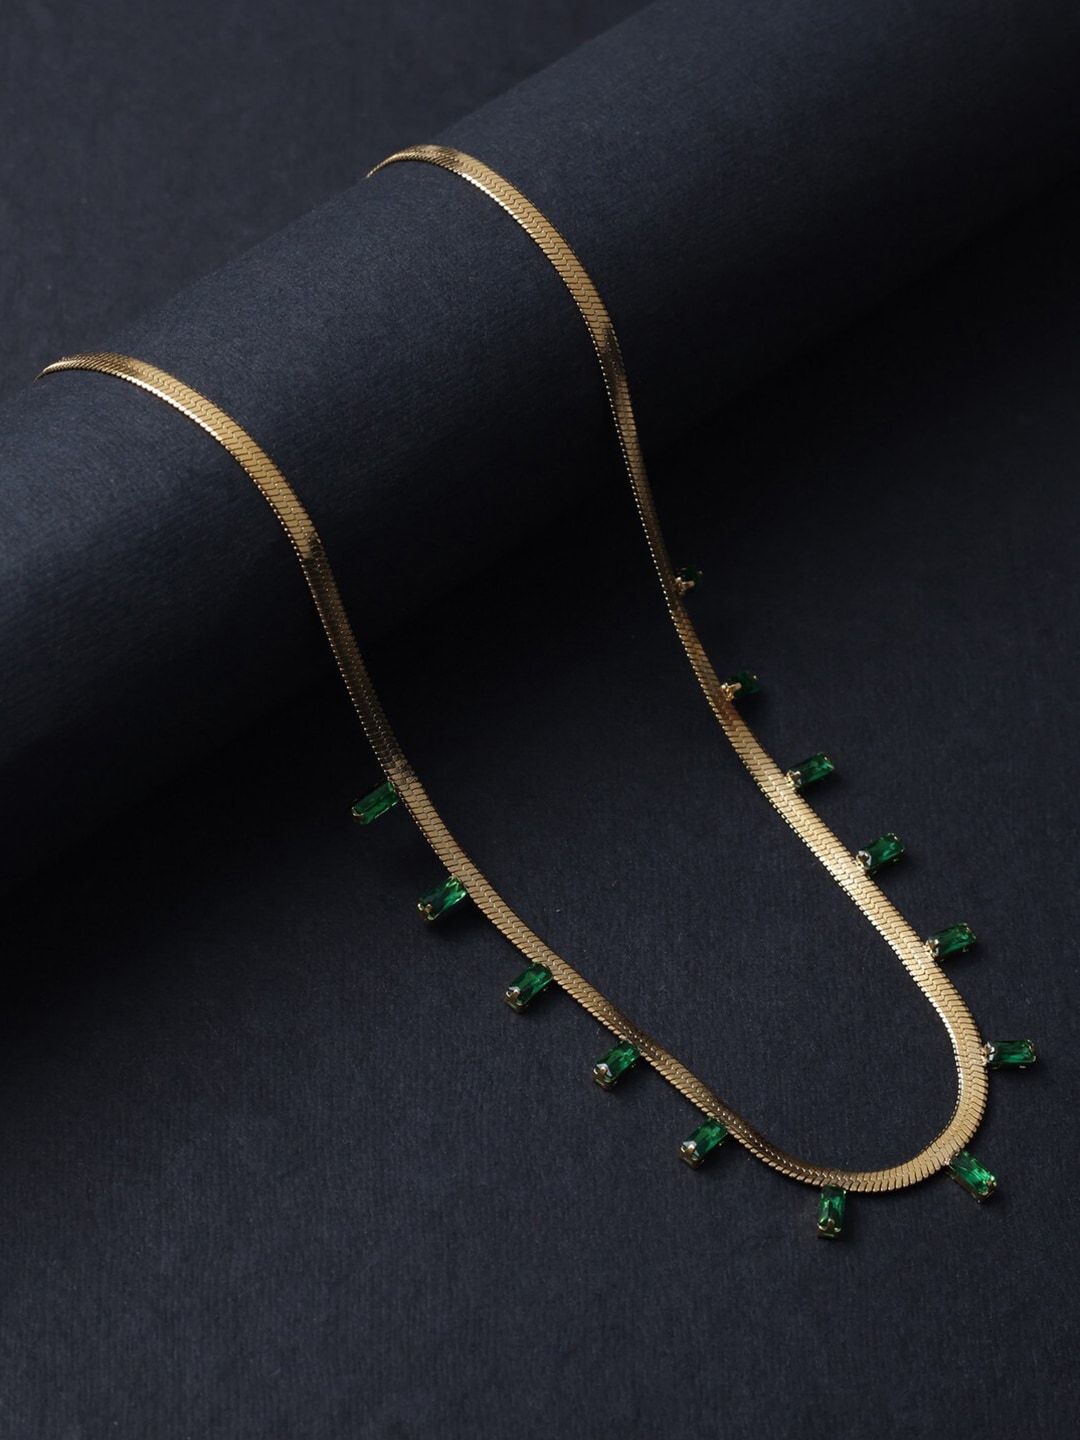 anore Gold-Toned & Green Gold-Plated Necklace Price in India